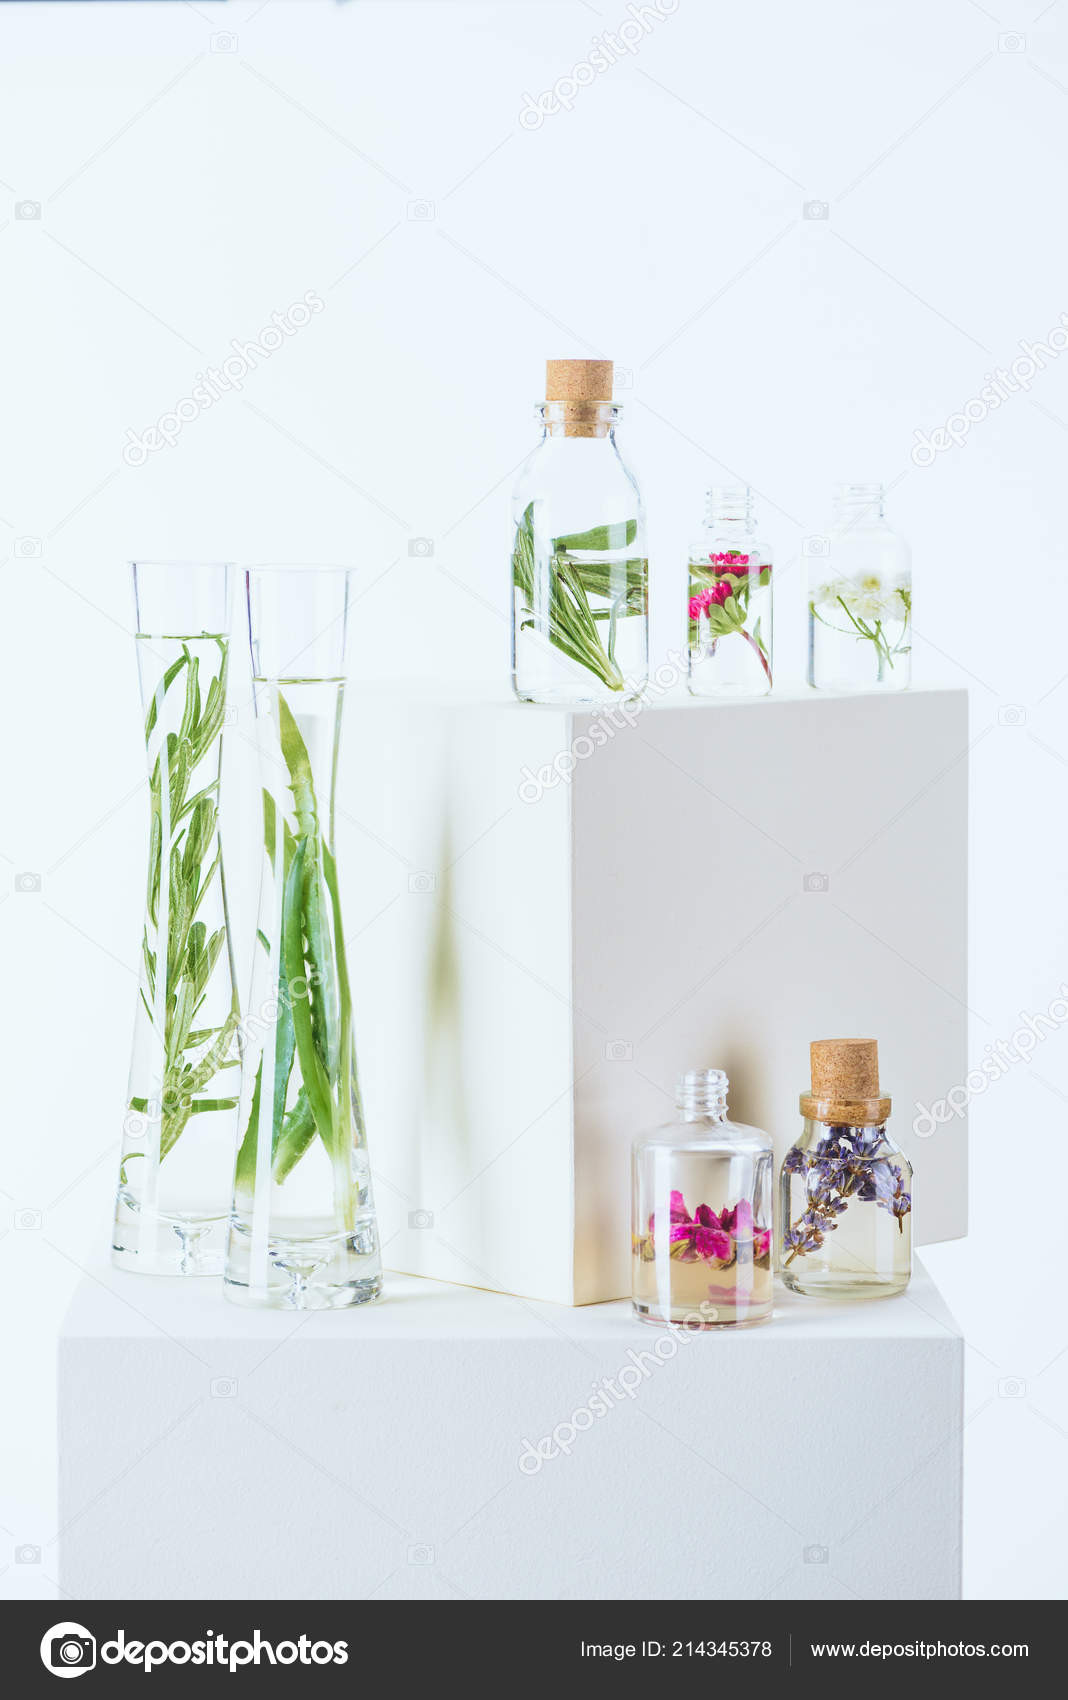 16 Trendy White Glass Cube Vase 2024 free download white glass cube vase of bottles vases natural herbal essential oils herbs flowers white in bottles and vases of natural herbal essential oils with herbs and flowers on white cubes fotografi